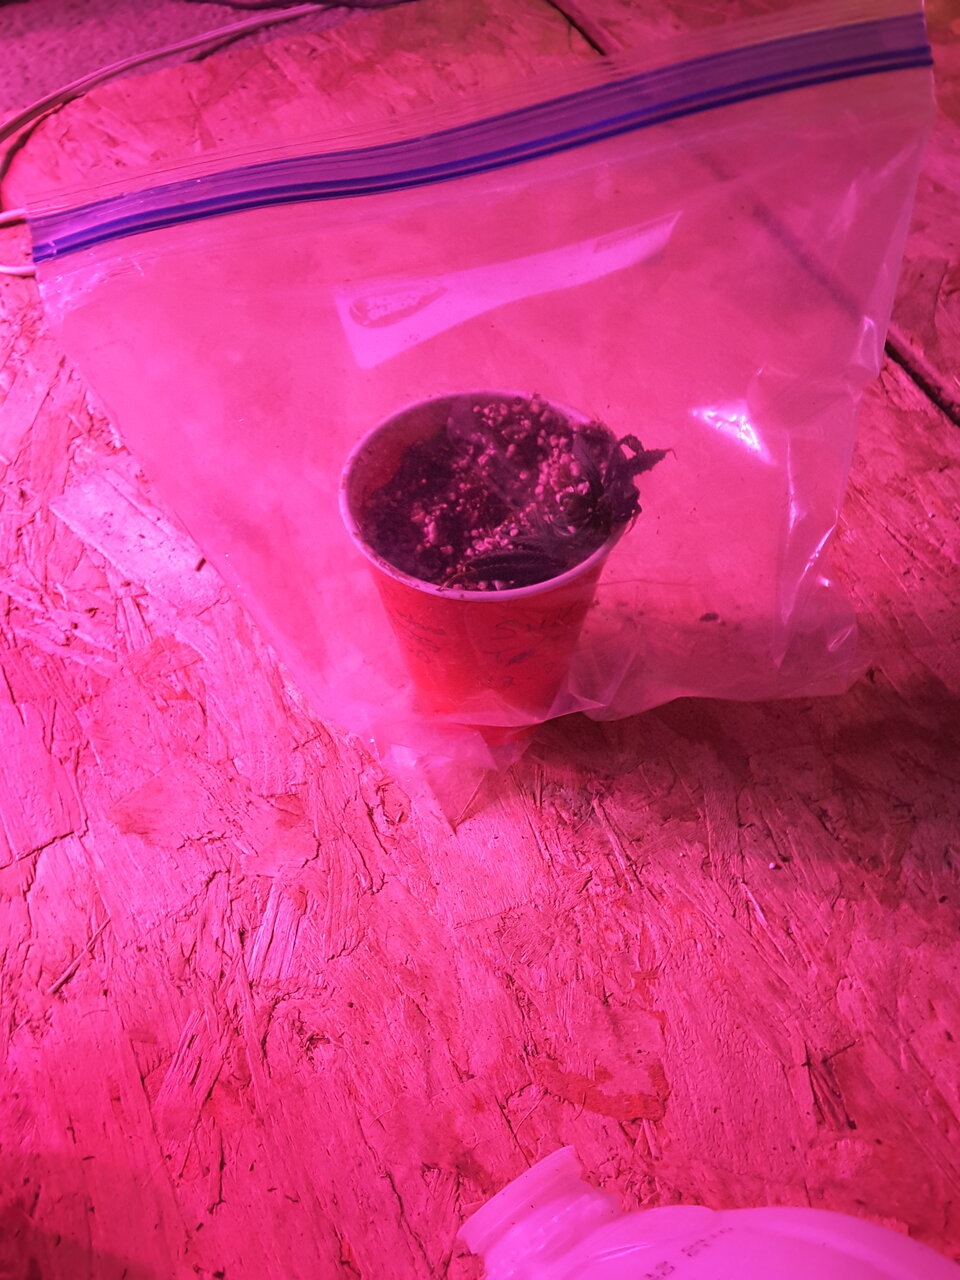 HB Clone i tried to root